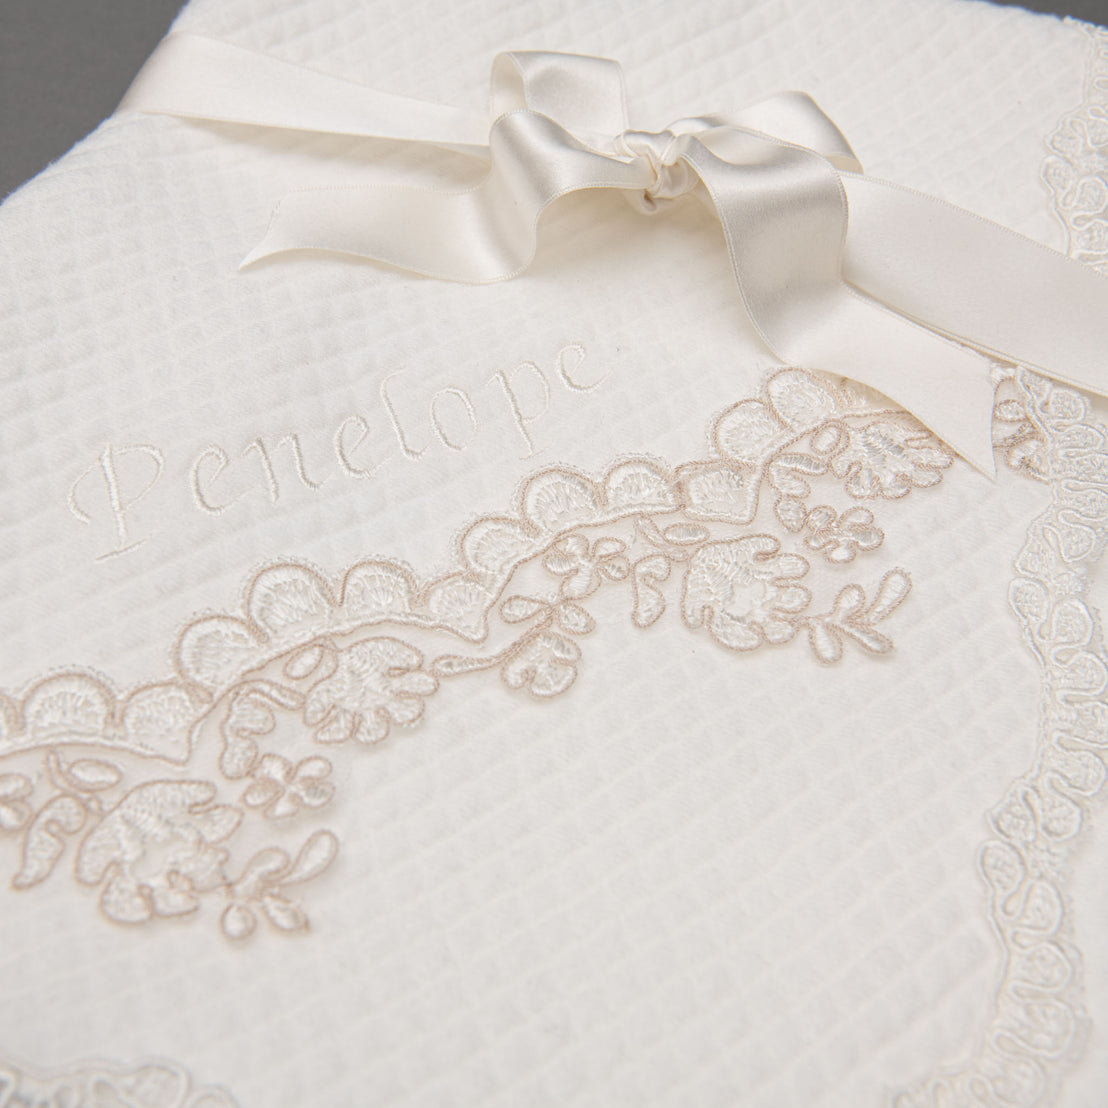 Close up detail of lace embroidery on the Penelope personalized baptism blanket.